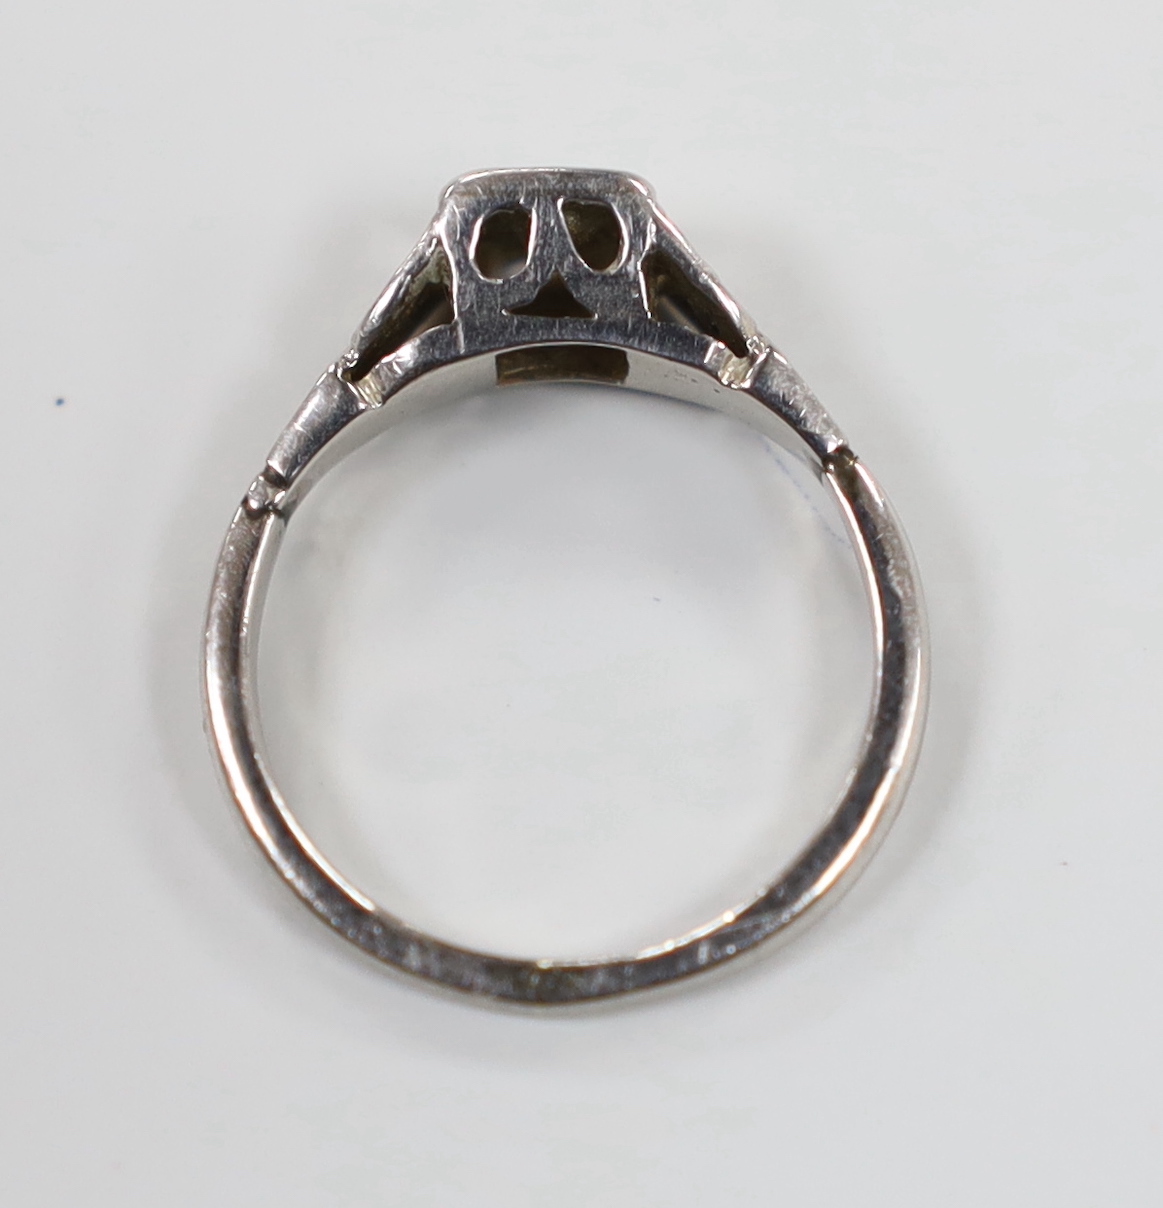 A white metal (stamped PALL?) and illusion set single stone diamond ring, size J/K, gross weight 2.3 grams.